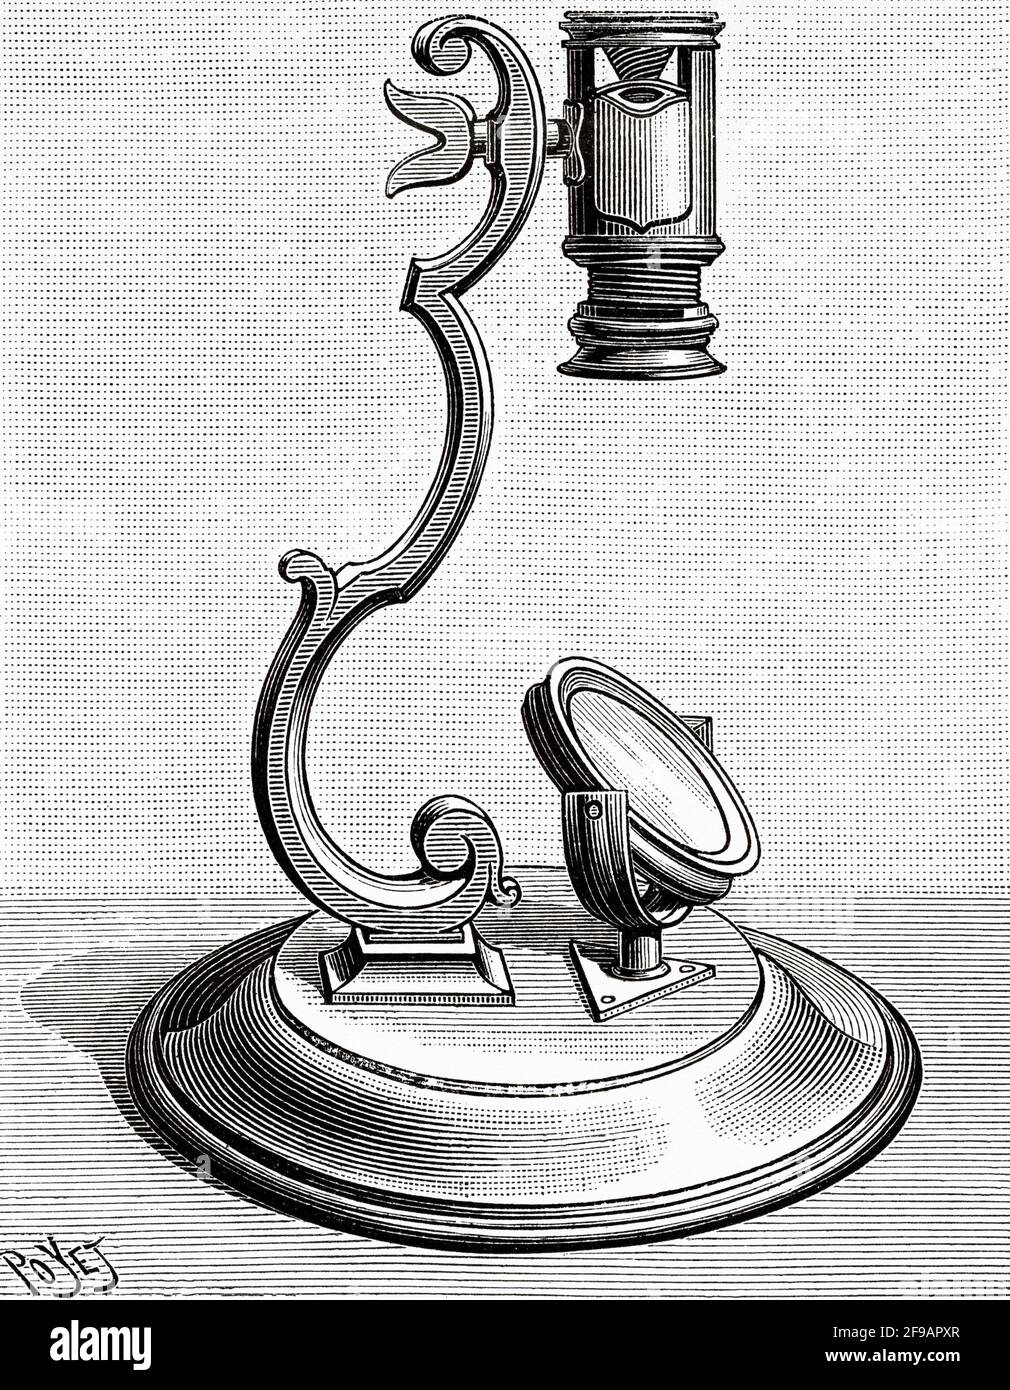 Baker mounted lens microscope 1745. Old 19th century engraved illustration from La Nature 1889 Stock Photo